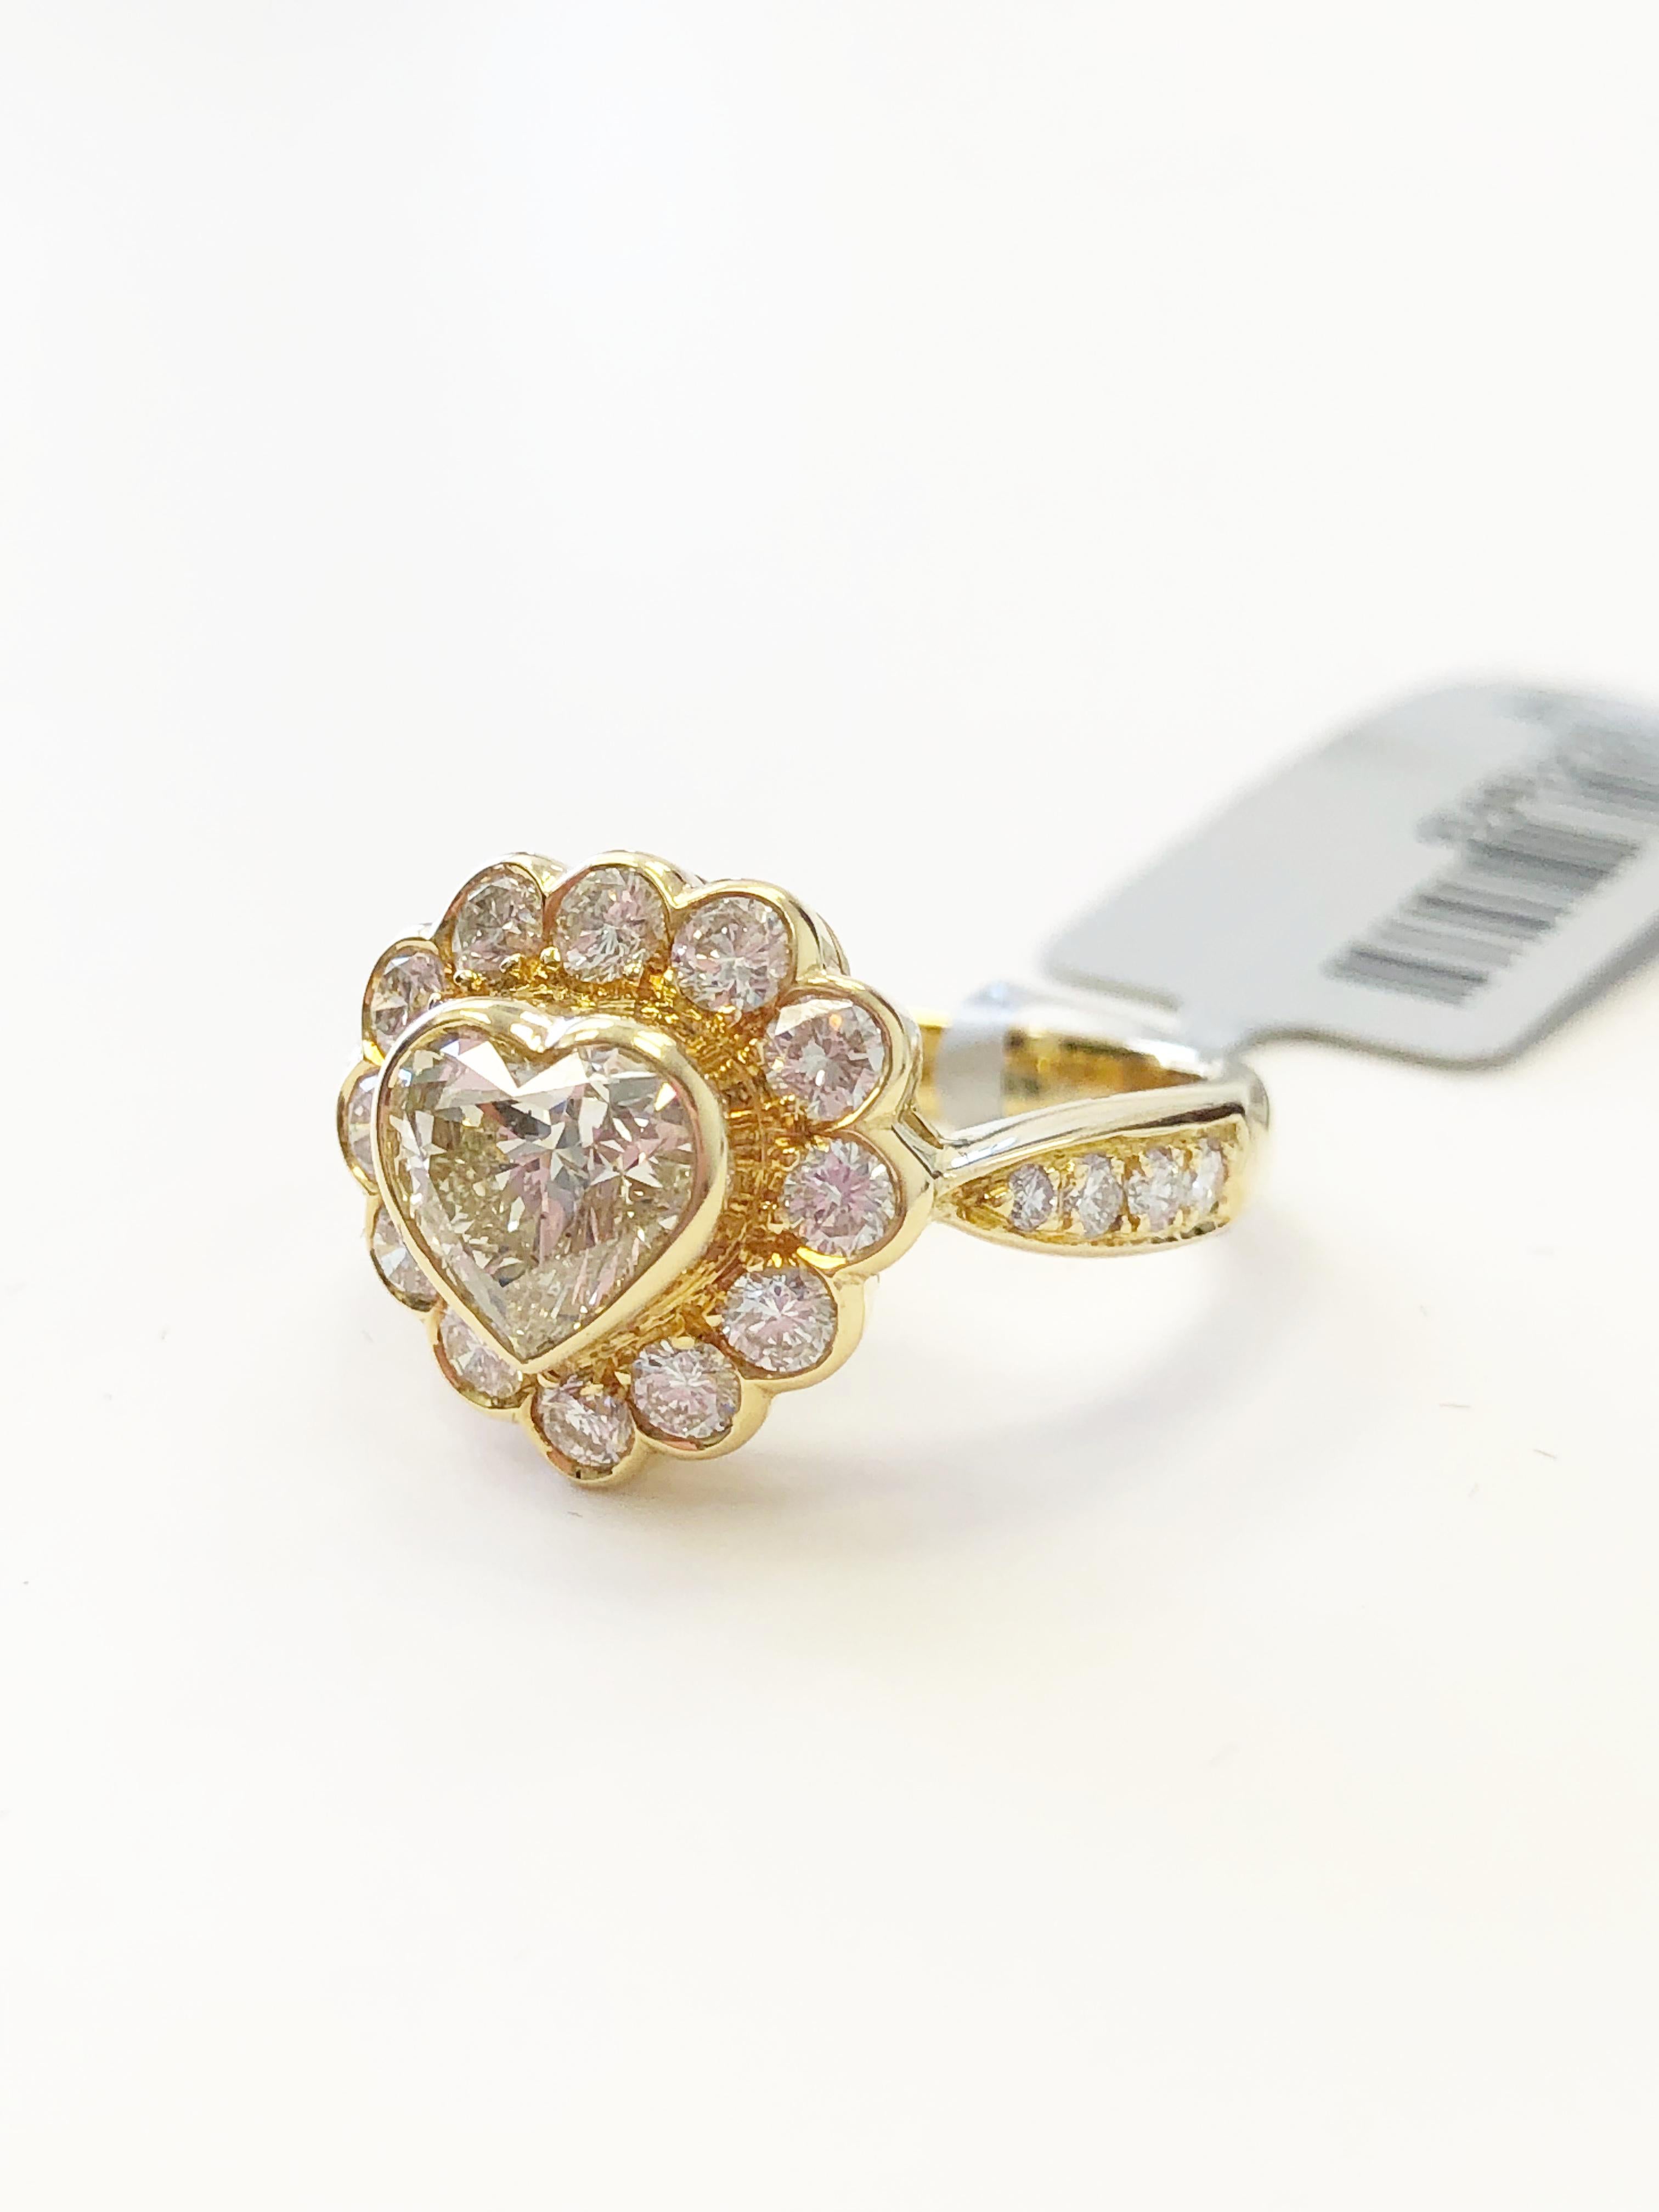 Stunning good quality bright heart shape weighing 1.18 carats with 0.91 carats of diamond rounds.  Handcrafted 18k yellow gold mounting in size 6.25.  This can be an engagement ring or a right hand cocktail ring.  Versatile and classic!

